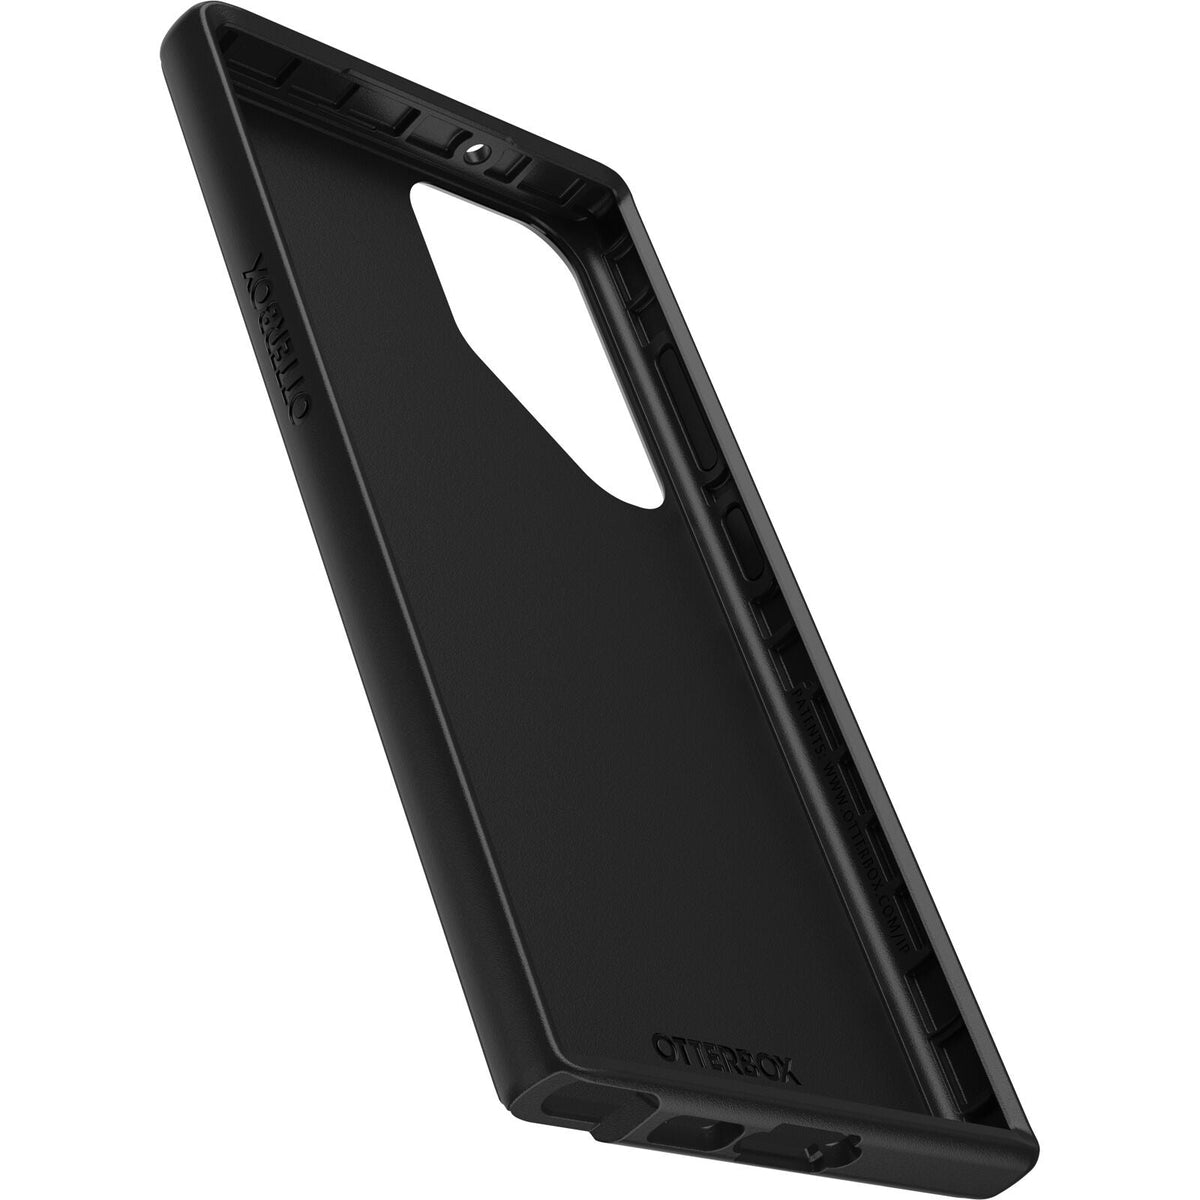 OtterBox Case For iPhone 13 Pro Max / 12 Pro Max Symmetry Series Antimicrobial Case